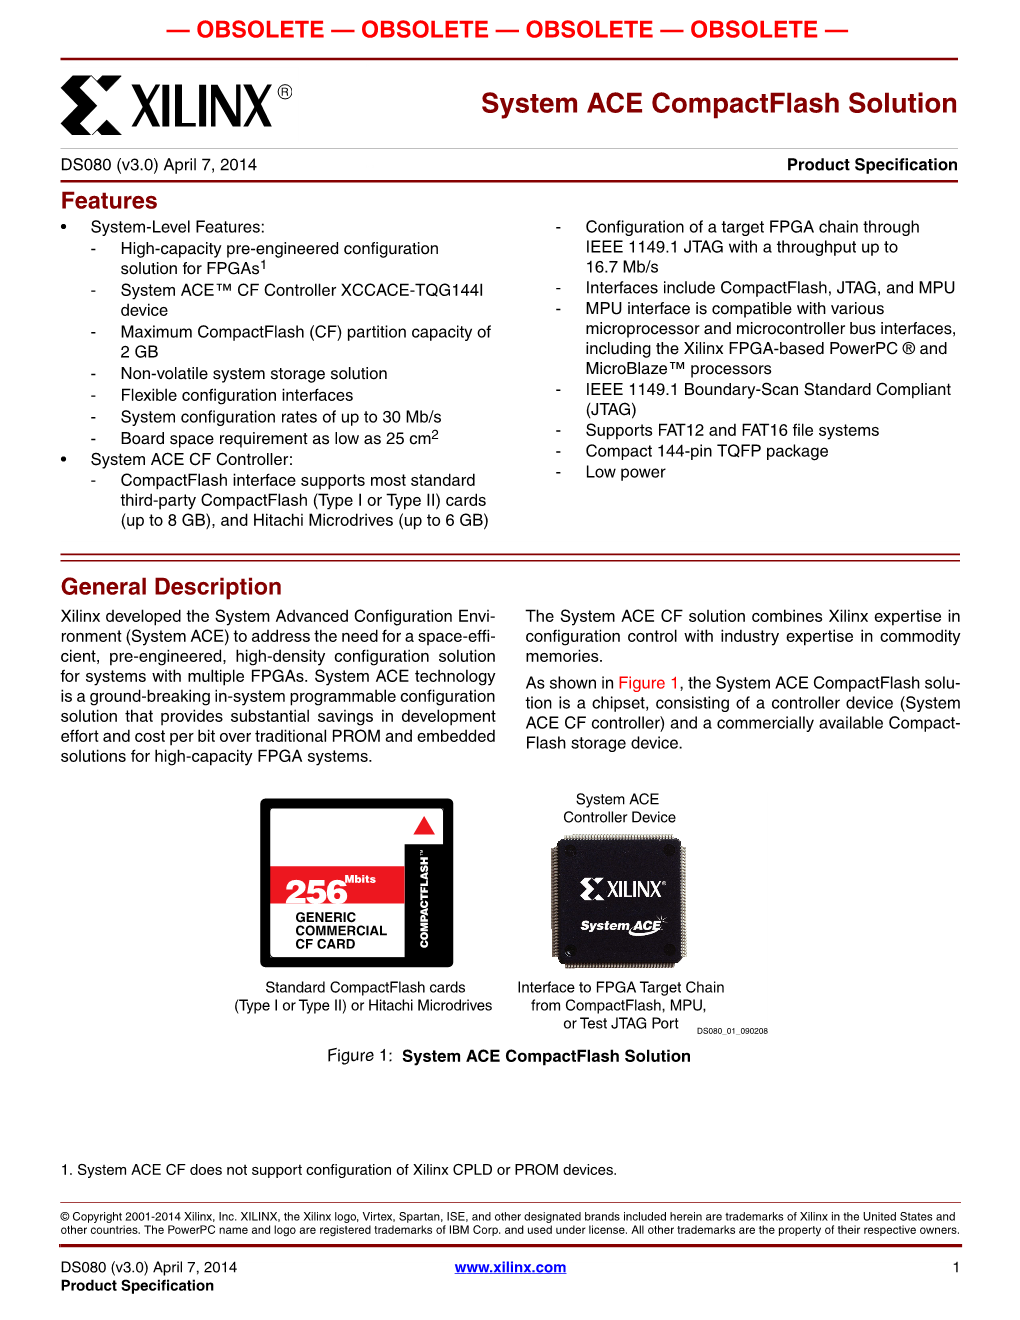 System ACE Compactflash Solution Data Sheet (DS080)